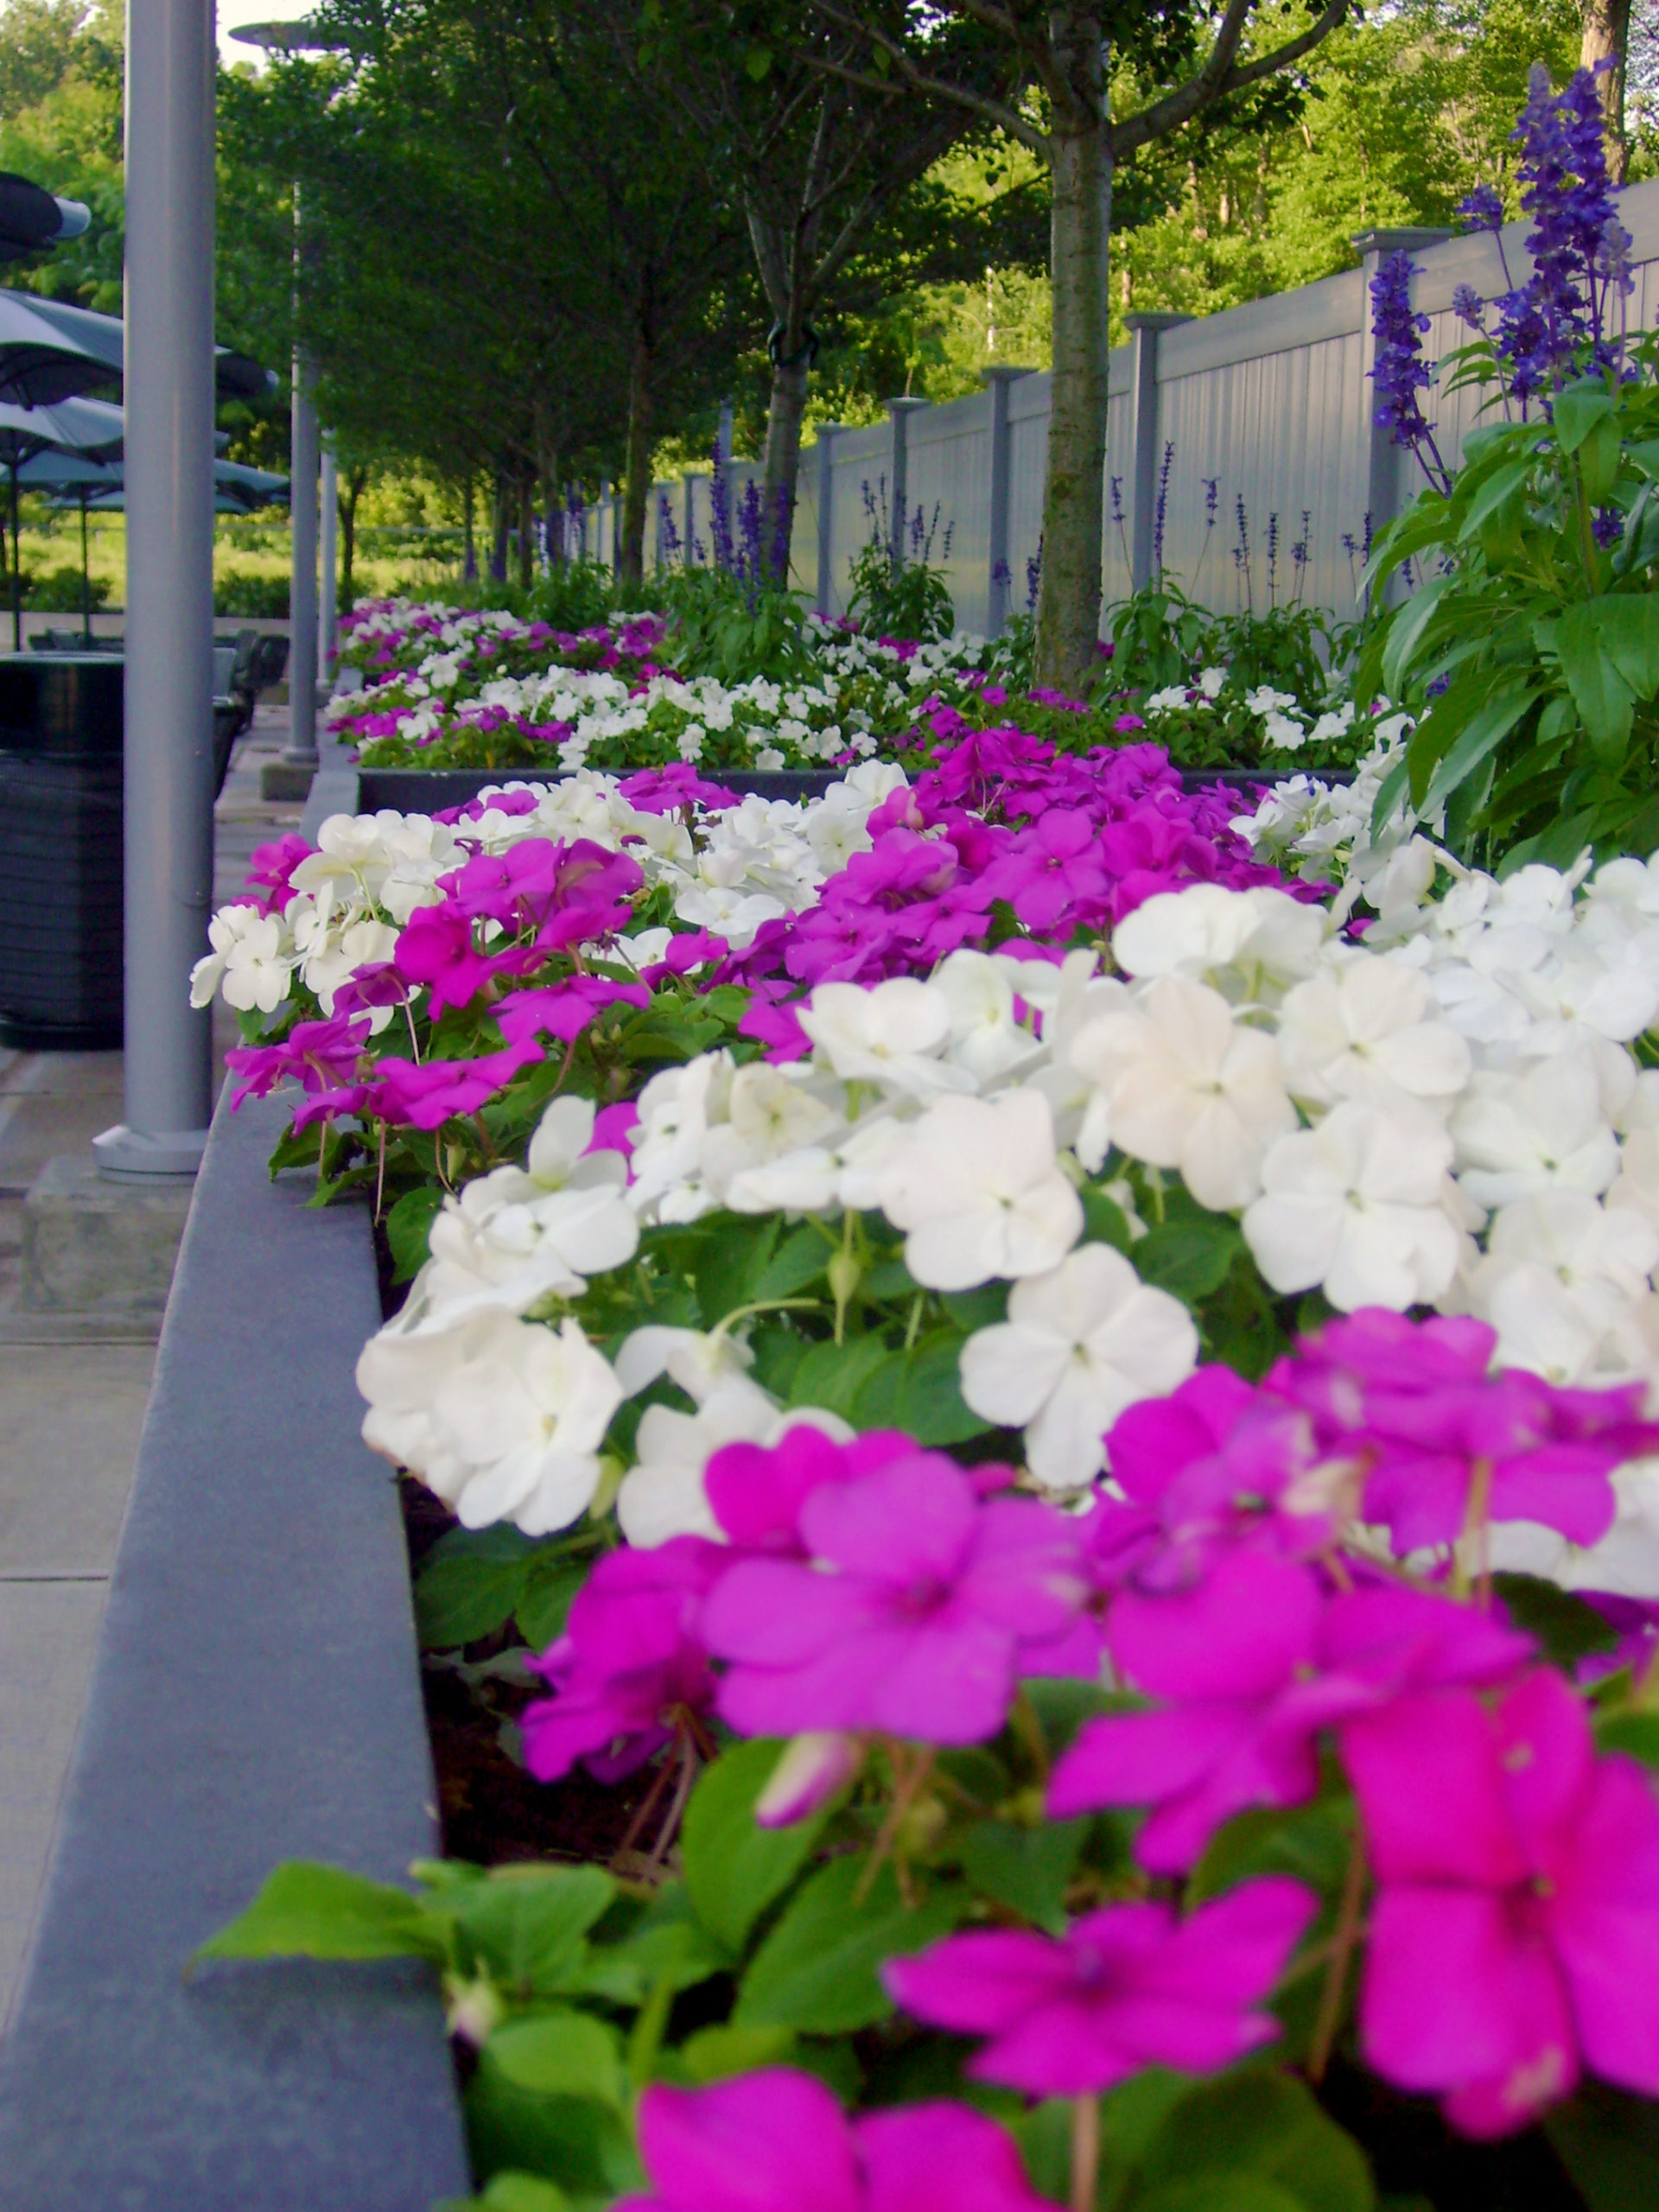 Commercial landscaping services in CT/NY